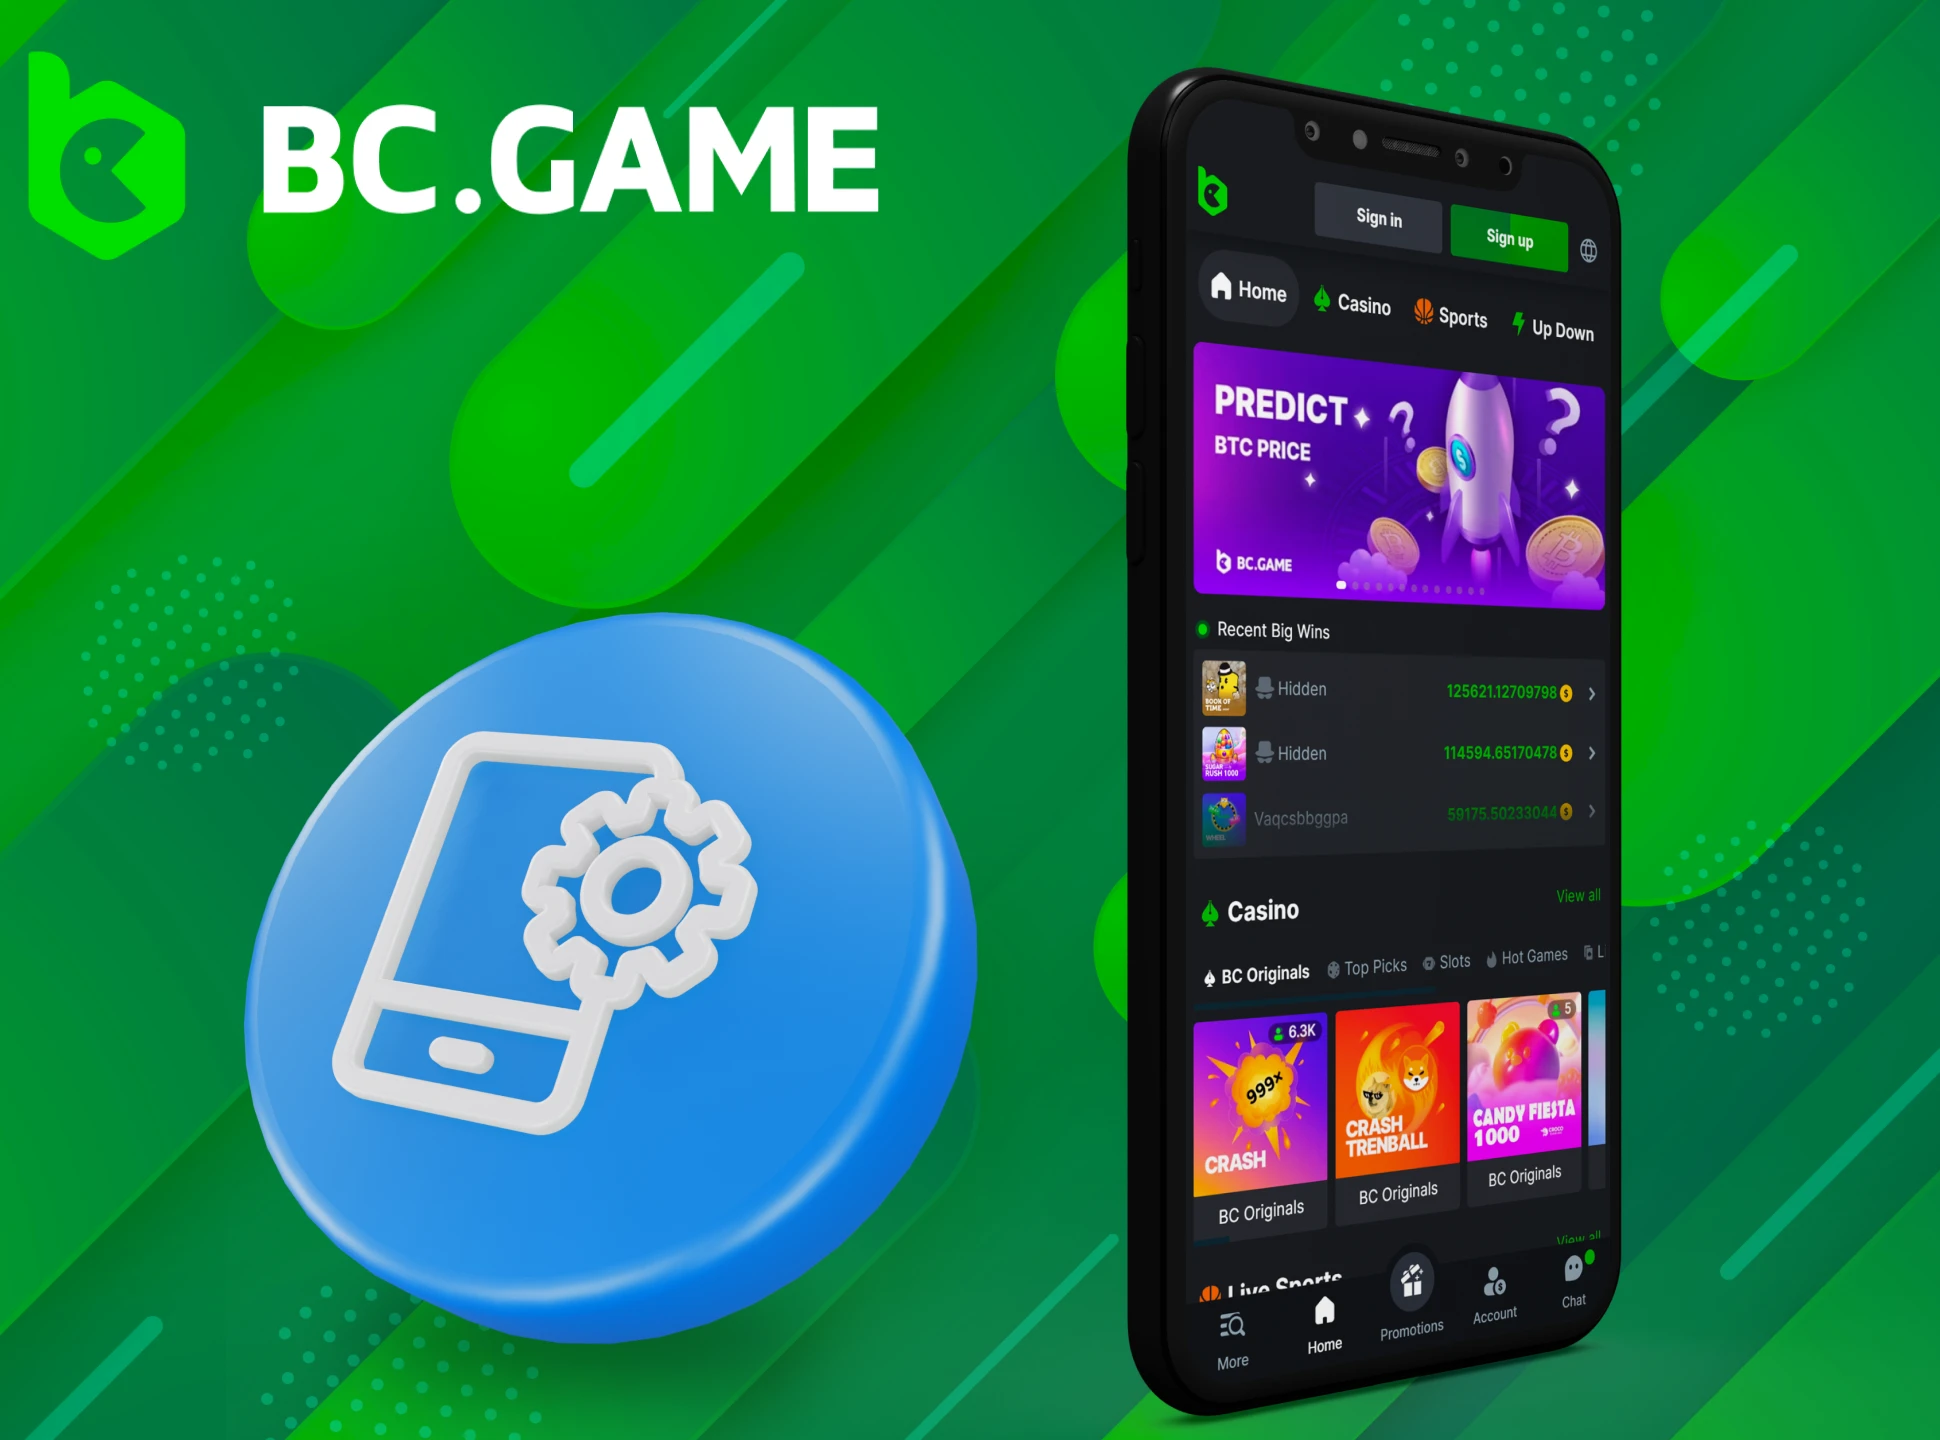 Updating the BC Game app does not require much space on your phone.